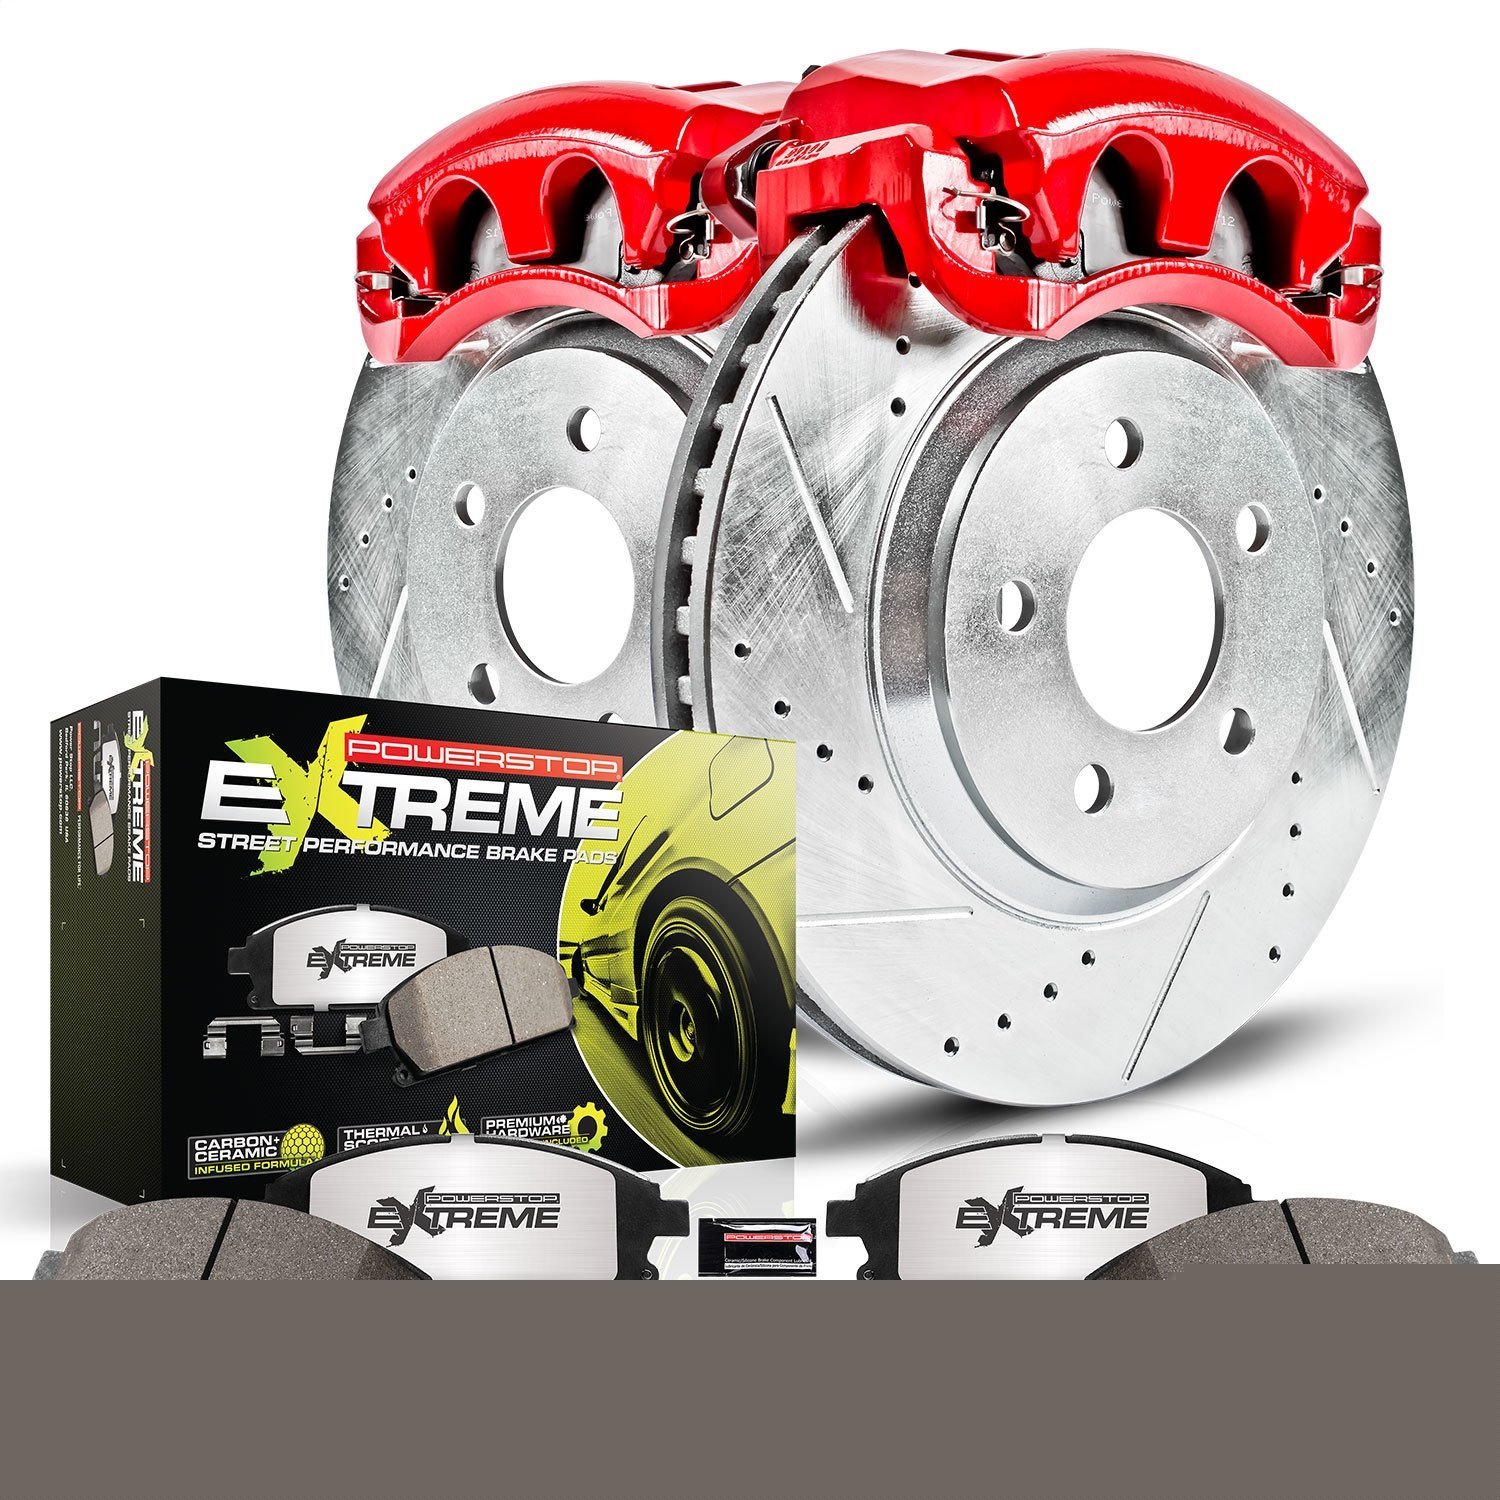 Street Warrior Brake Upgrade Kit Cross-Drilled and Slotted Rotors Z26 Extreme Street Performance Bra